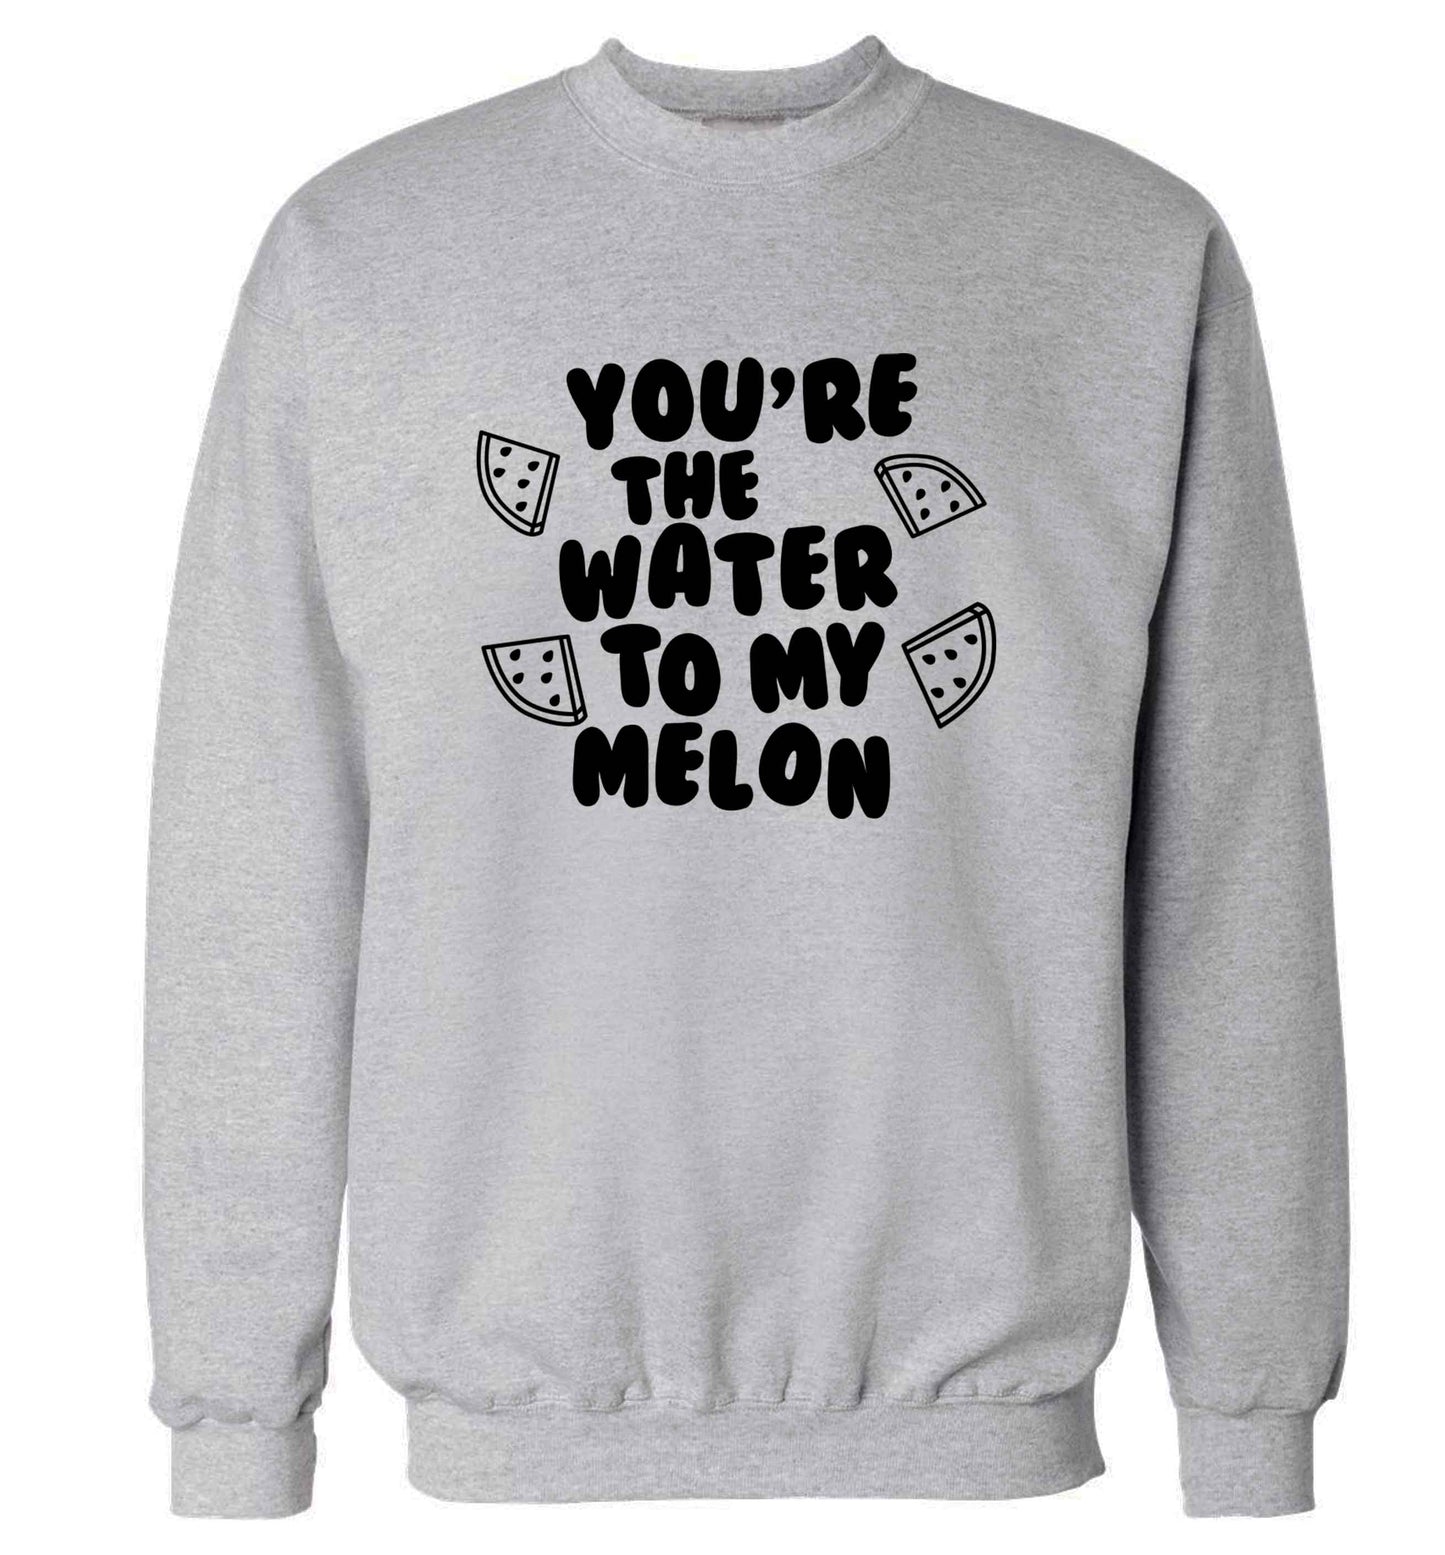 You're the water to my melon adult's unisex grey sweater 2XL